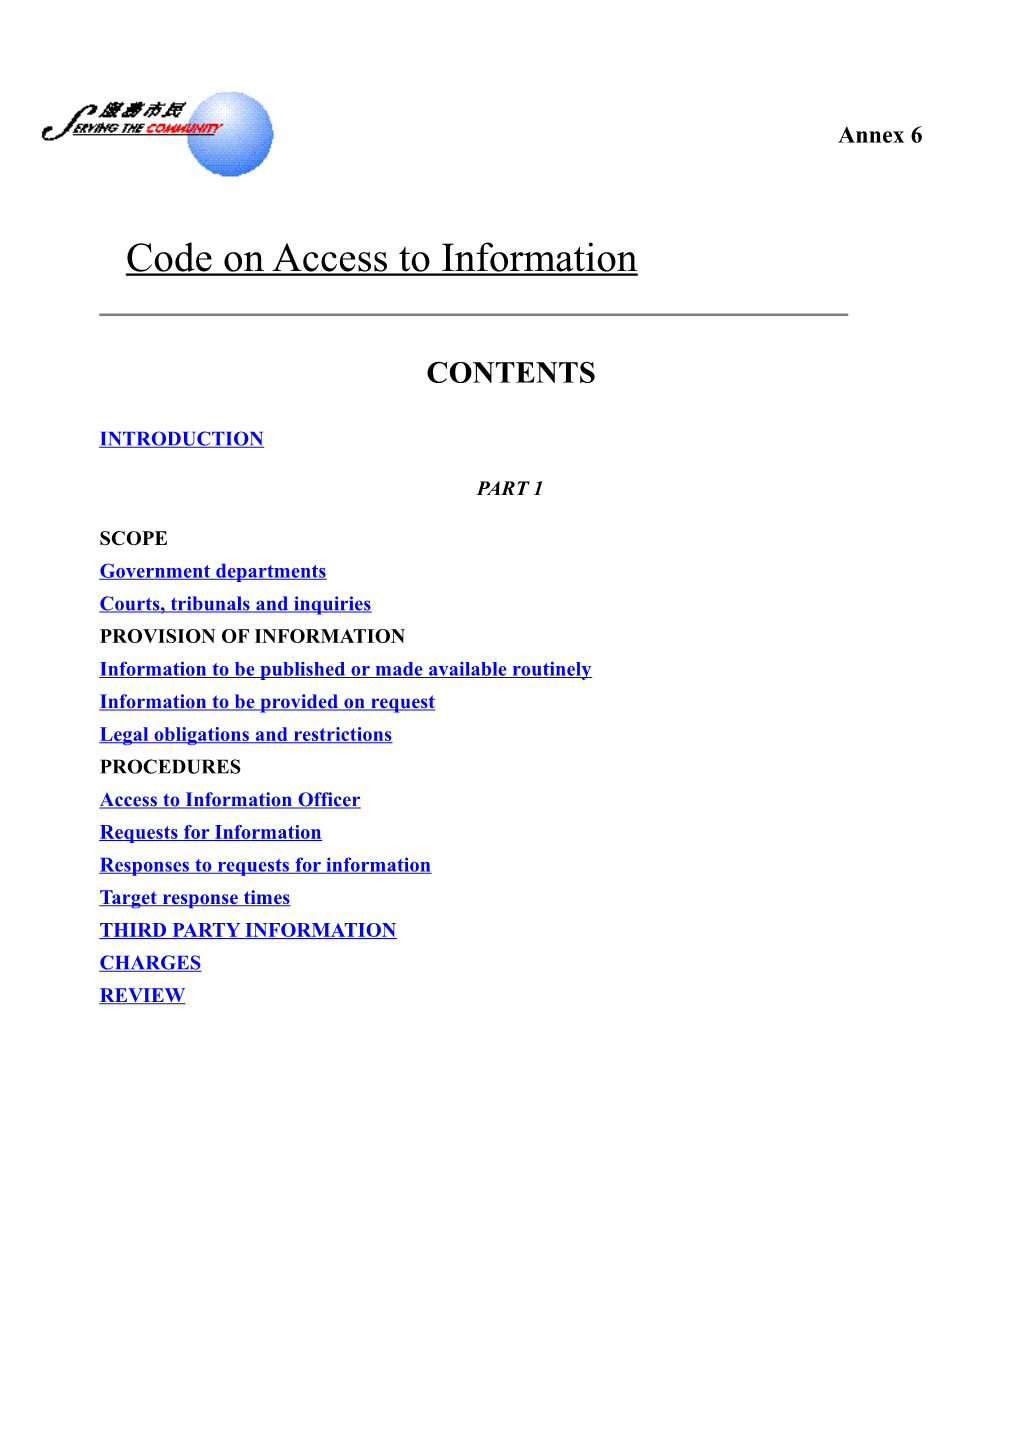 Code on Access to Information